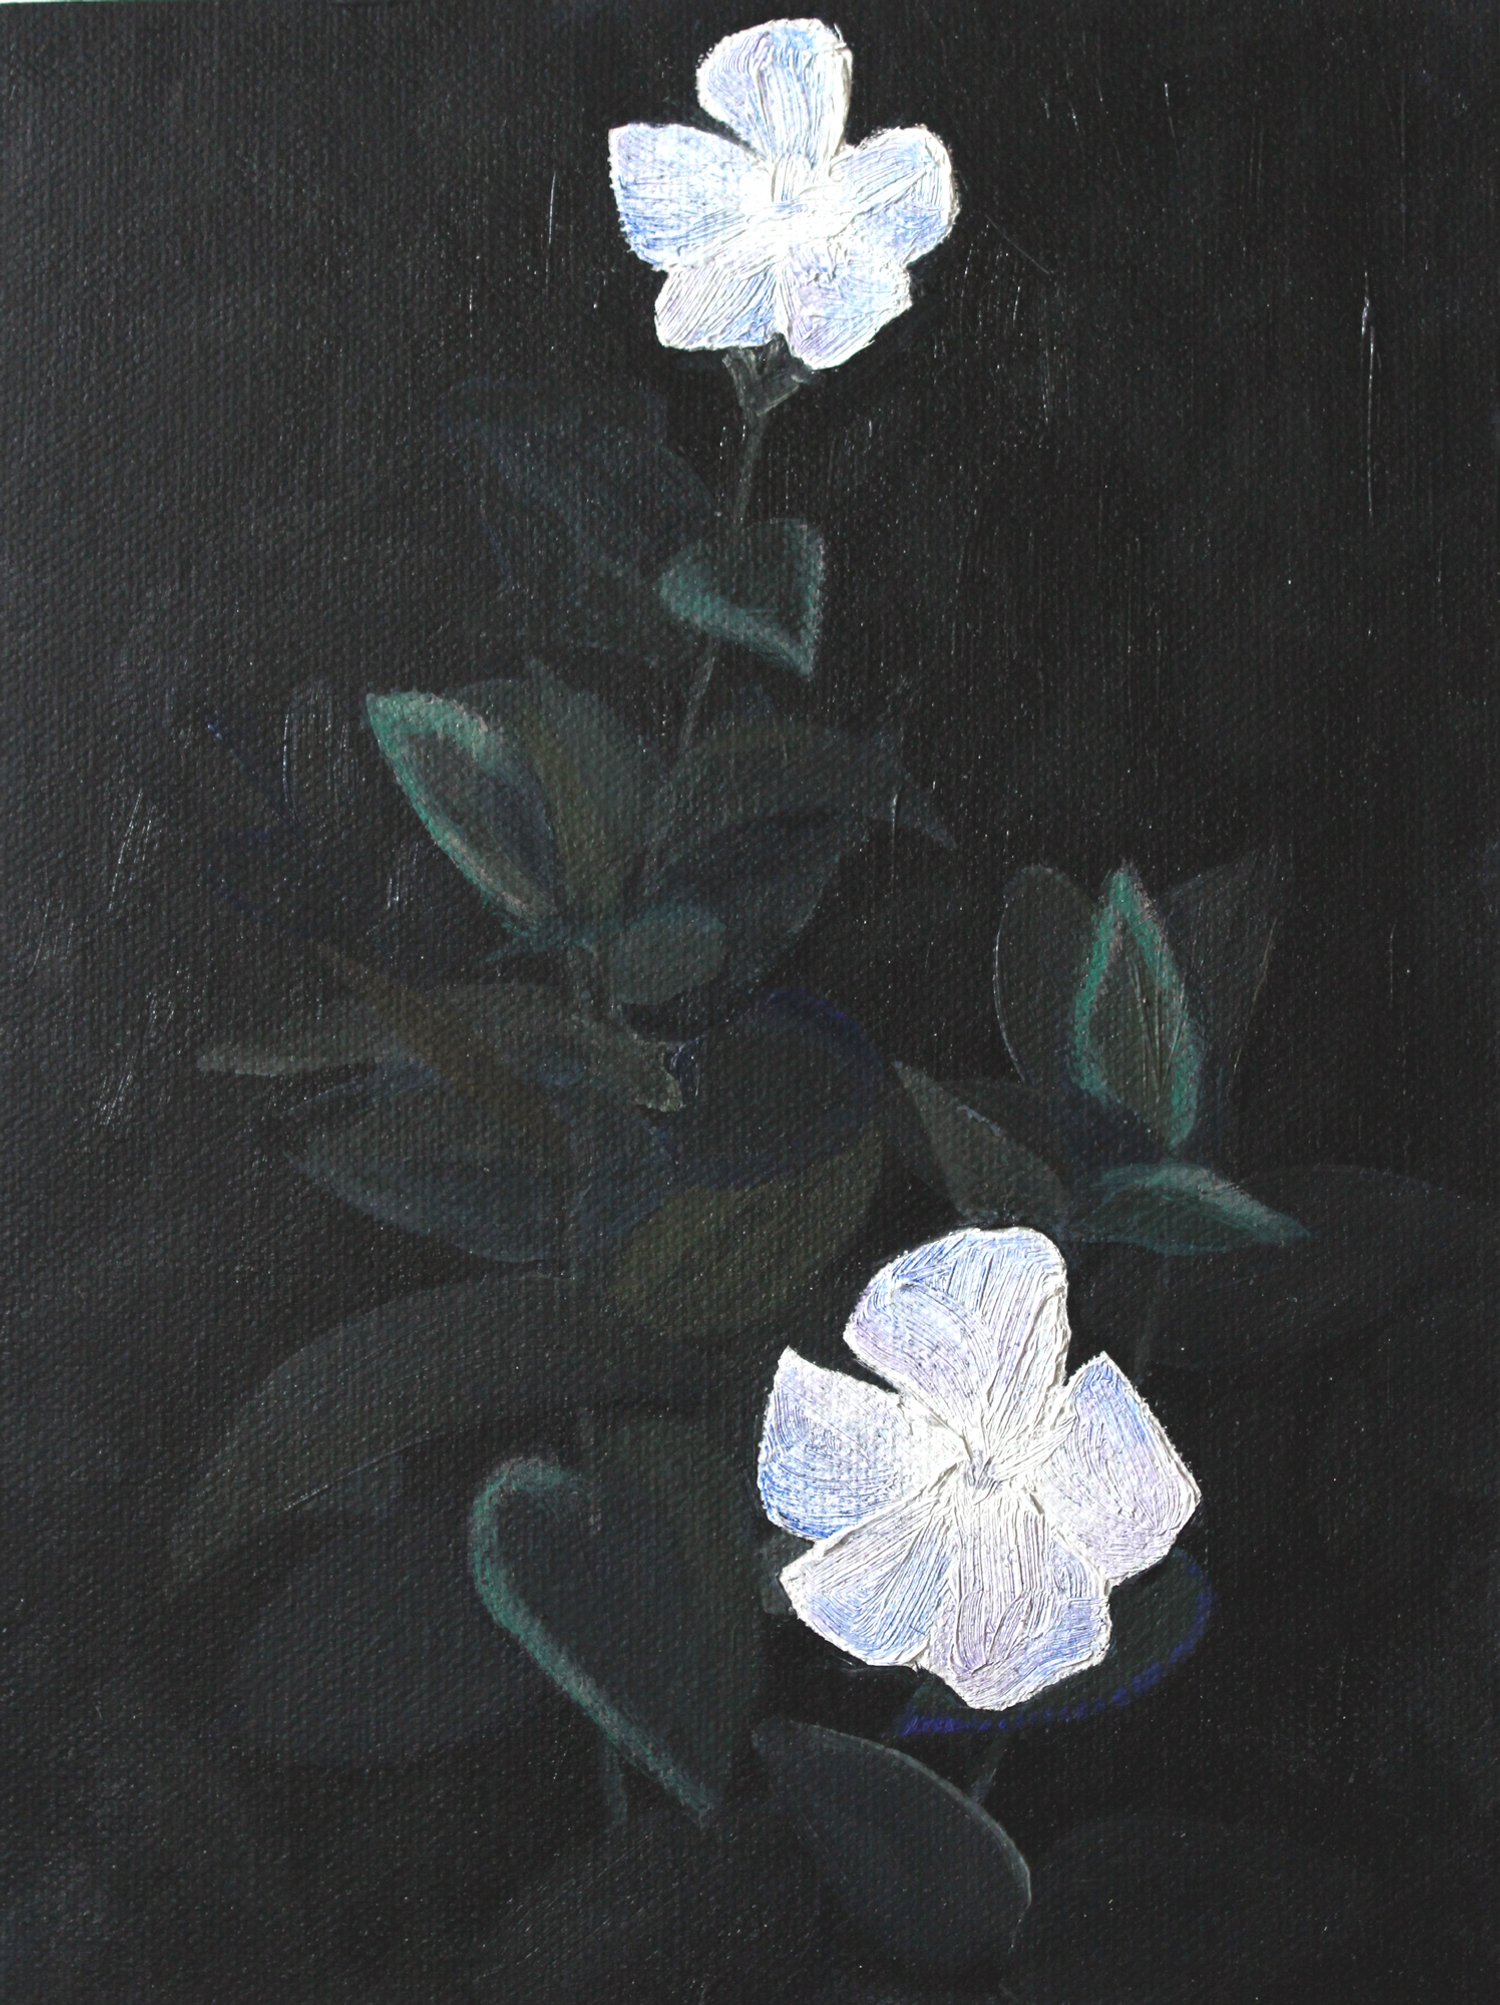   Two Flowers    2021, oil on canvas board, 24 x 18cm  